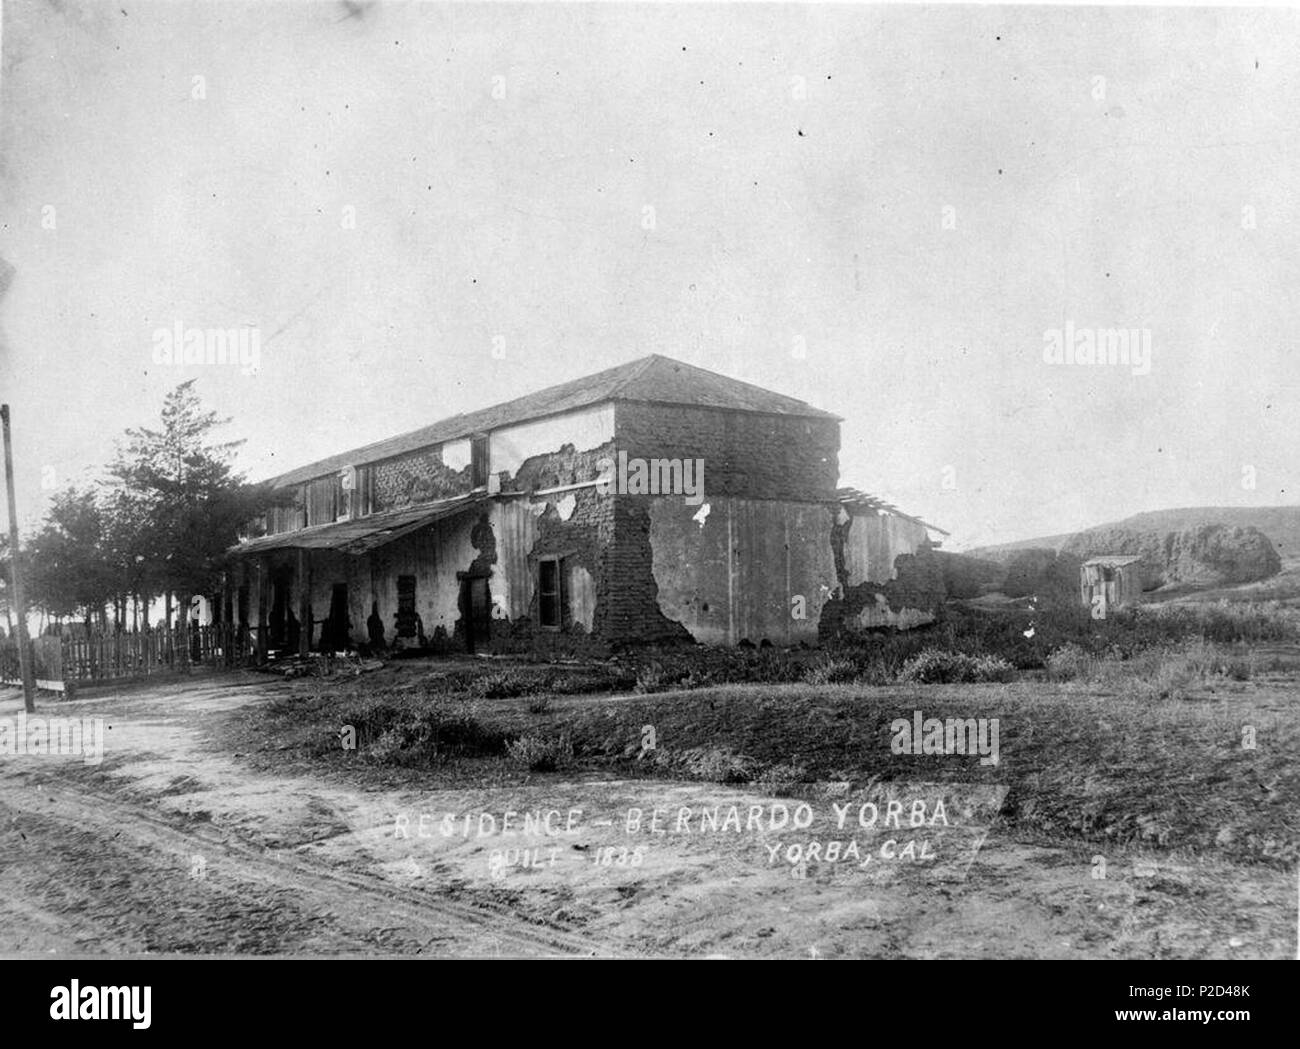 . English: Looking northwest towards the Bernardo Yorba adobe house, also called Hacienda Yorba de San Antonio. The south awning and underlying plaster is still intact which is missing in photos taken December of 1919. The roof is not damaged on the east end which an eyewitness account says was present in 1917 which dates the photo before then. The Hacienda was built in 1835 on the north bank of the Santa Ana River on the Rancho Cañón de Santa Ana. Contributed to the Yorba Linda Public Library by the First American Corporation. circa 1900. Unknown 7 Bernardo Yorba Adobe Stock Photo